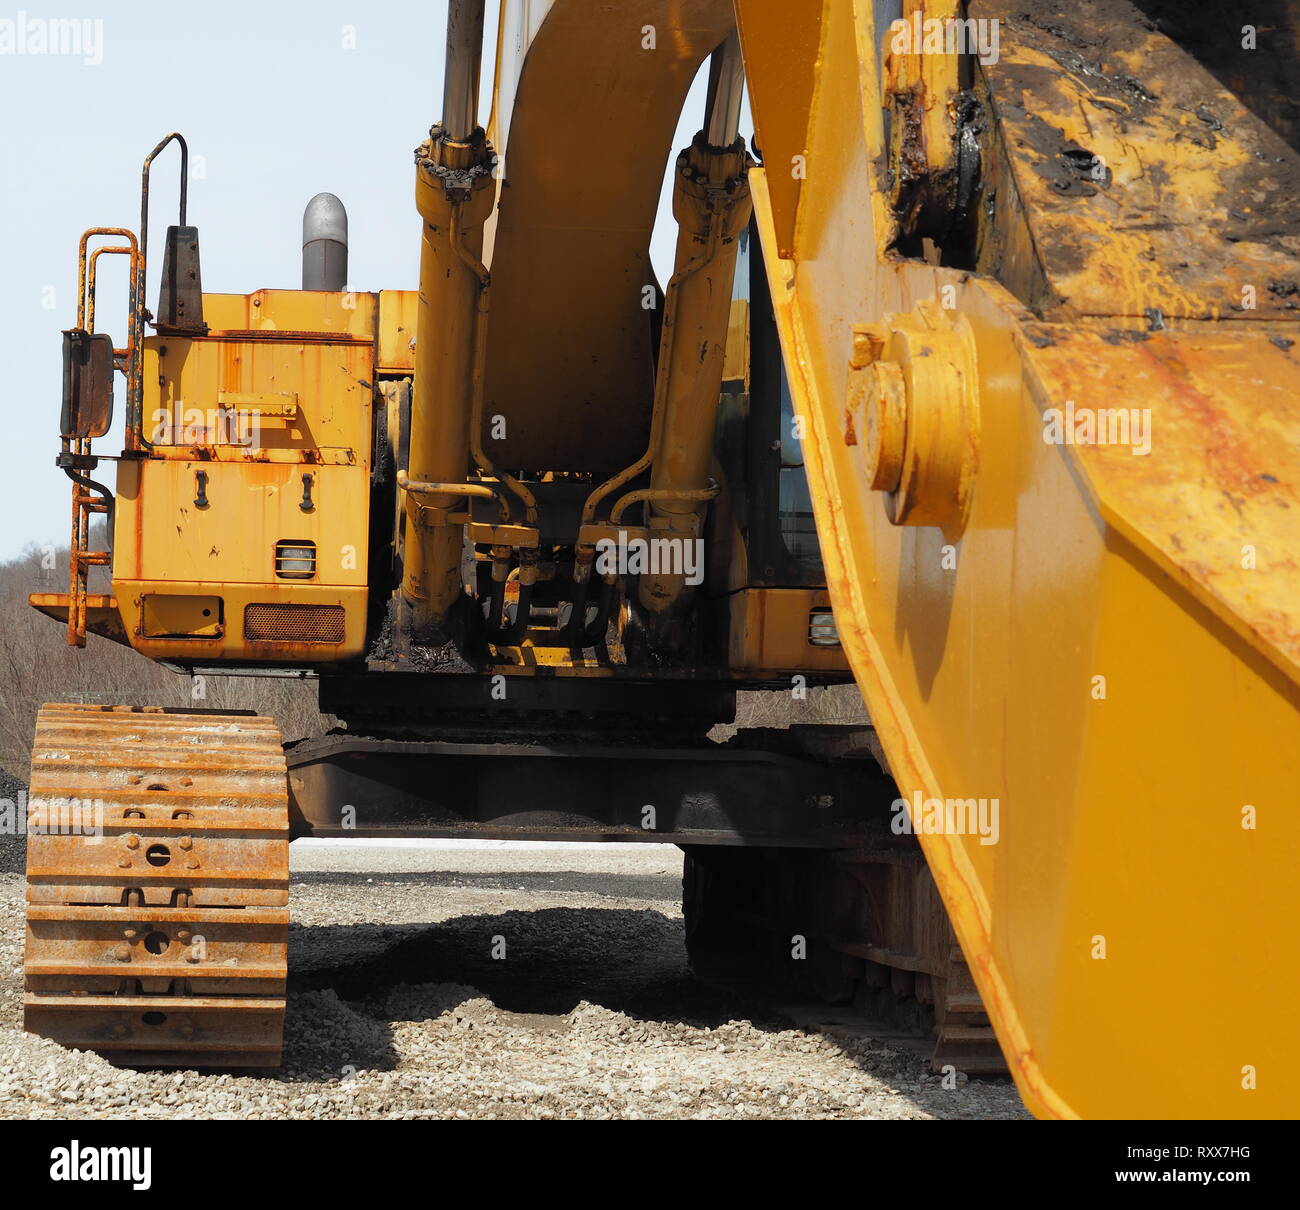 Yellow excavator with extended boom construction equipment Stock Photo